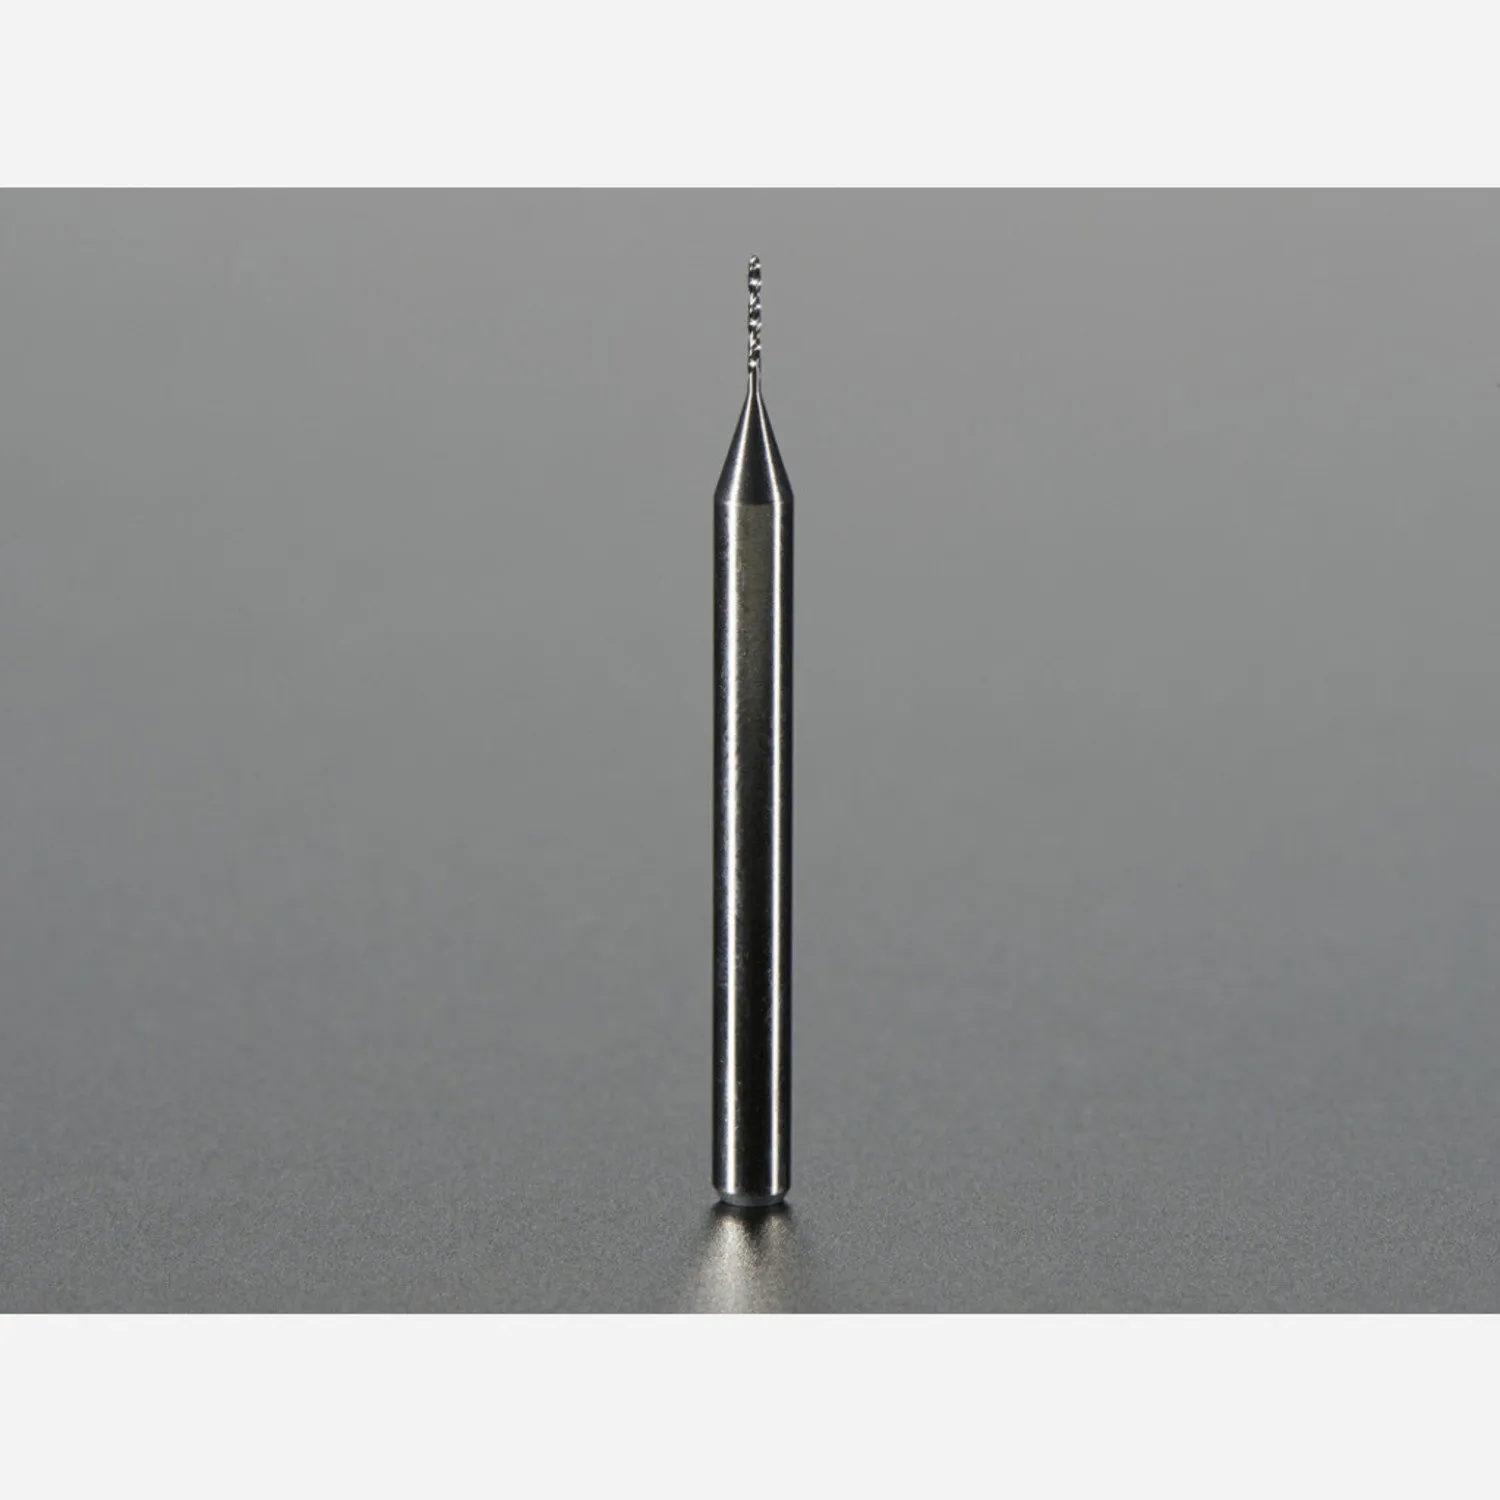 Photo of Carbide Square End Mill - 1/8 Shaft - 0.5mm Diameter